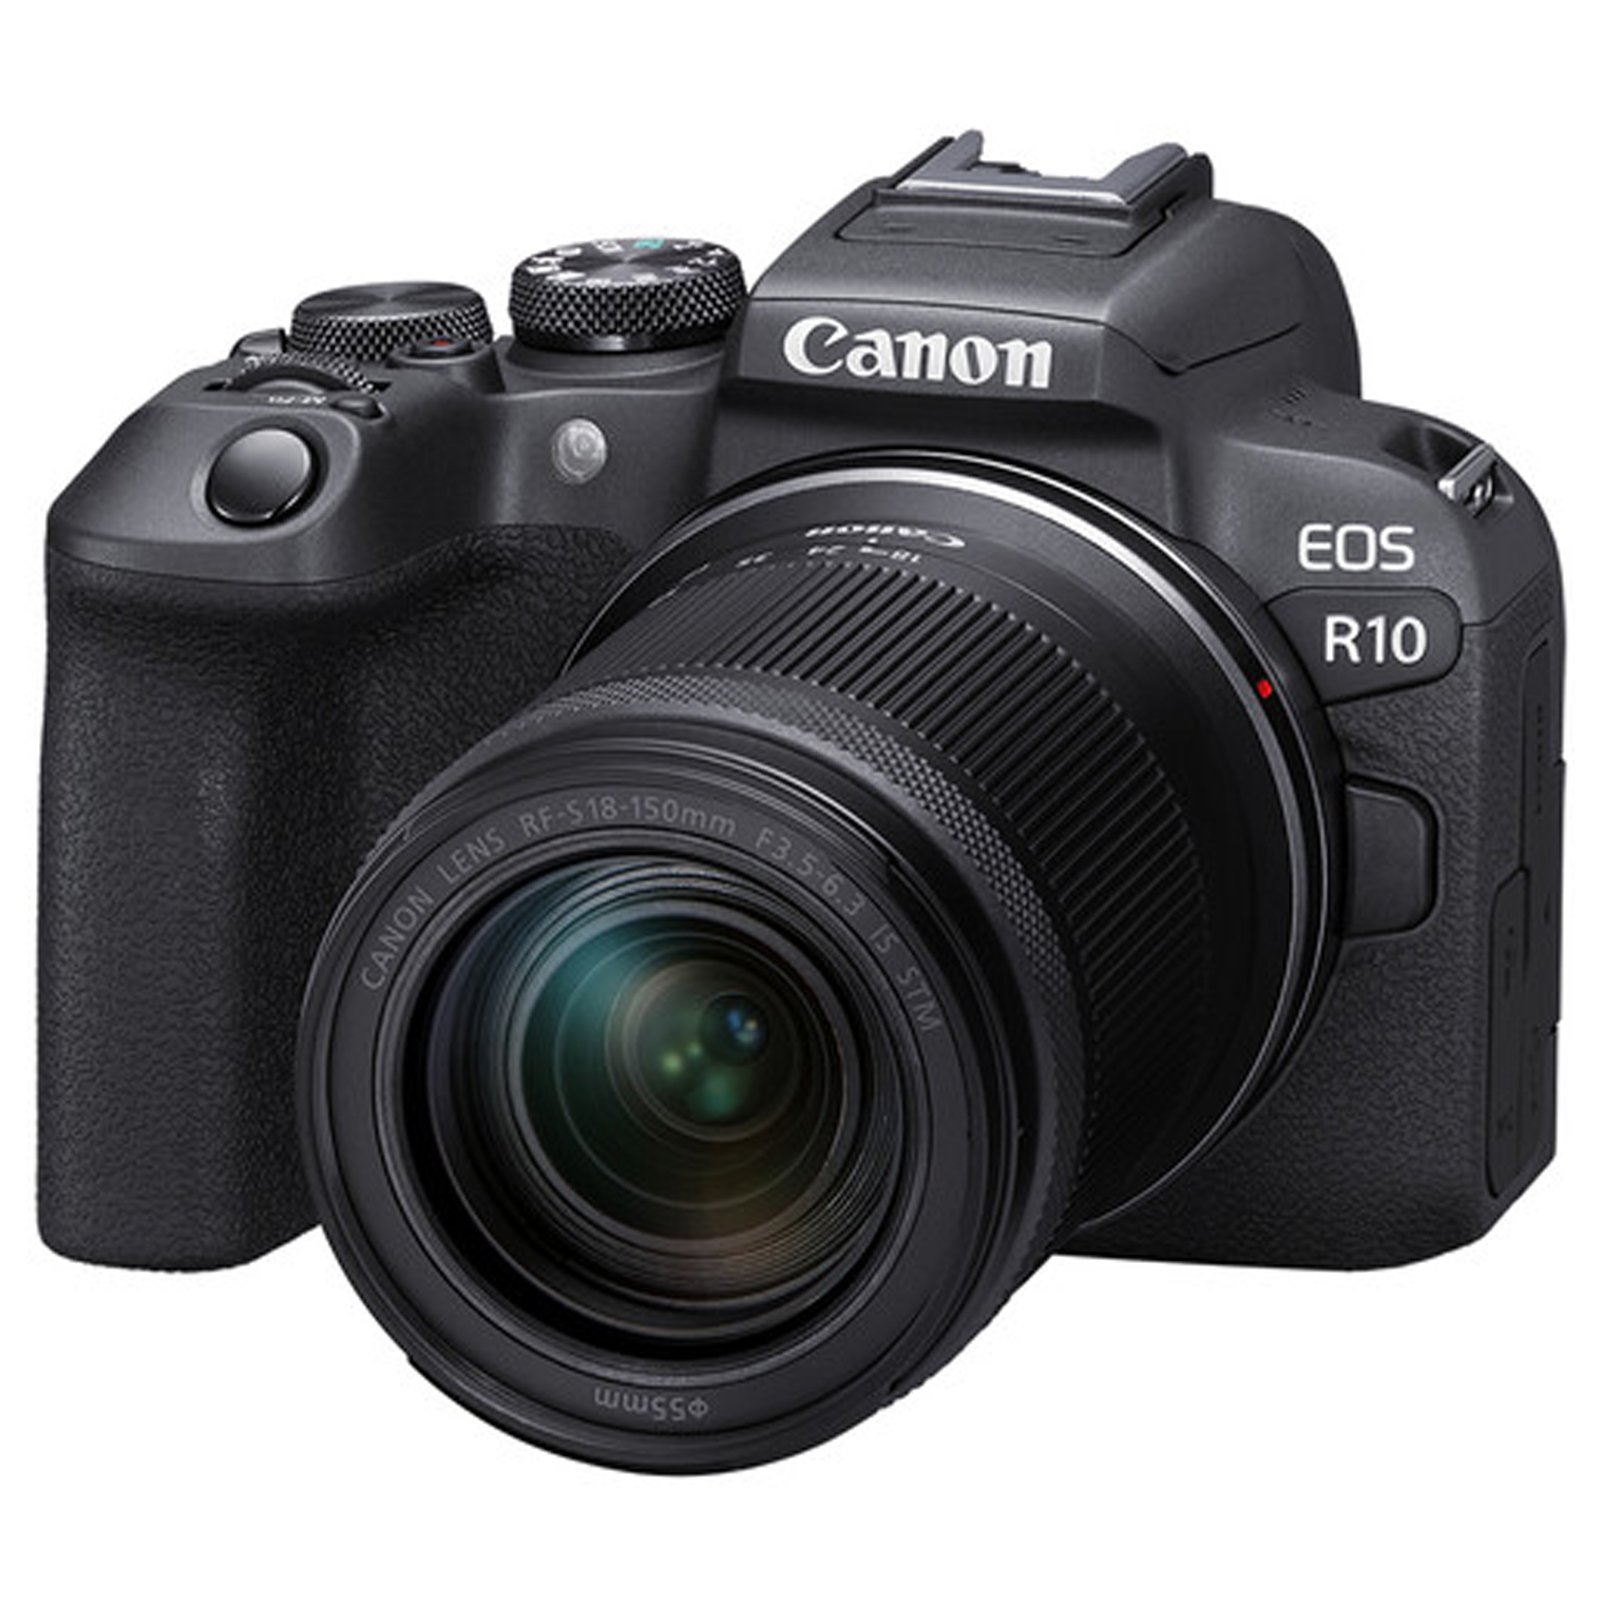 Image of Canon EOS R10 Digital Camera with 18150mm Lens